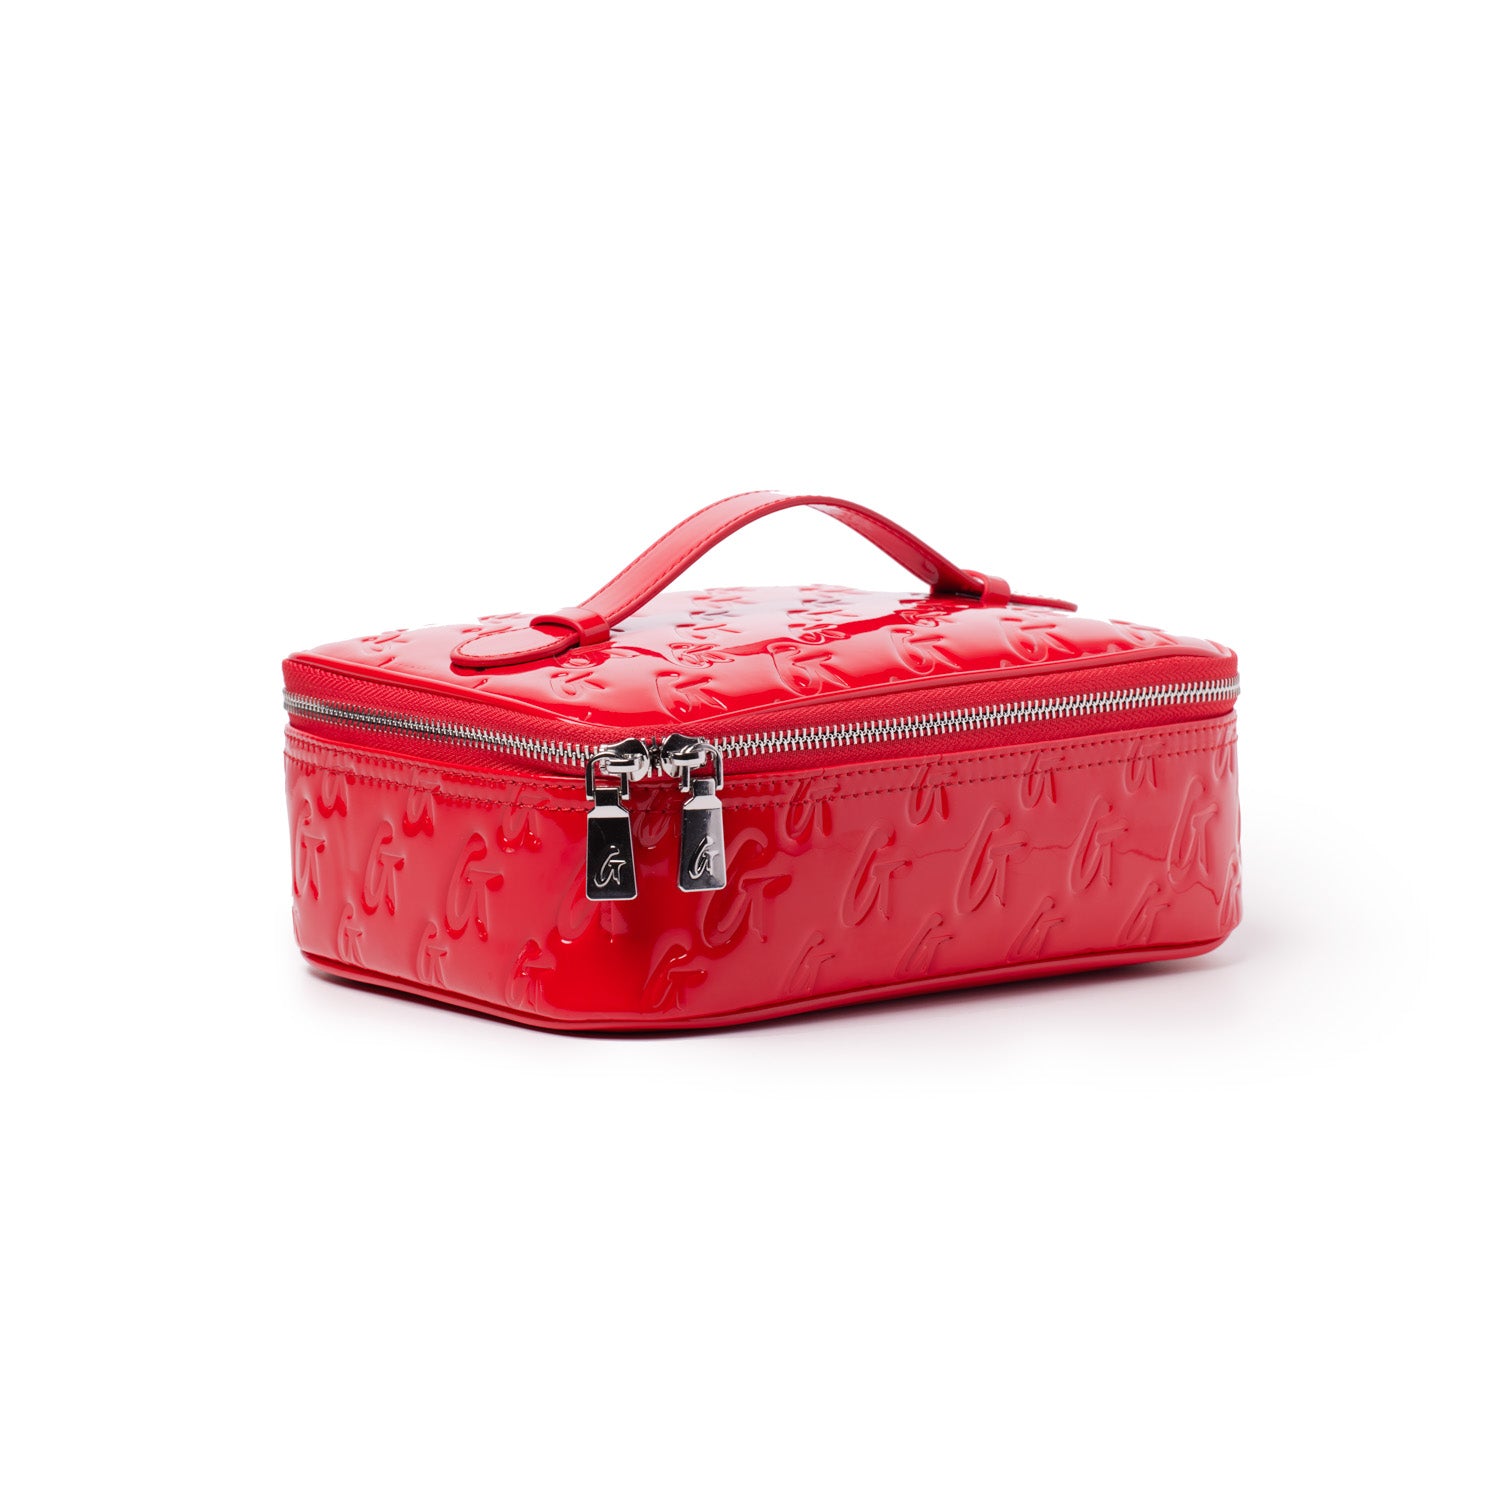 MONOGRAM LARGE COSMETIC TOILETRY BAG MIRROR RED – Glam-Aholic